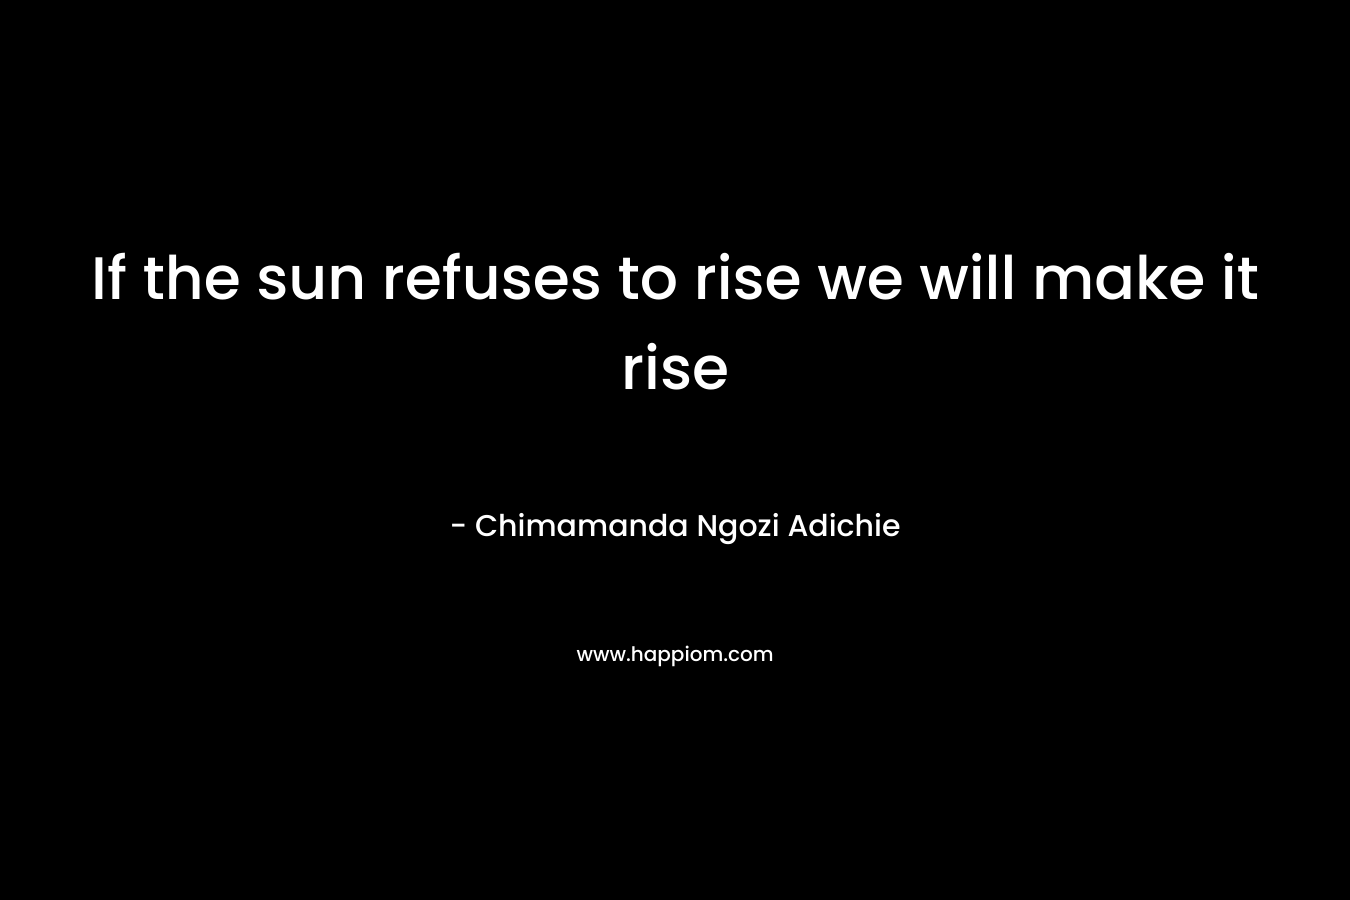 If the sun refuses to rise we will make it rise